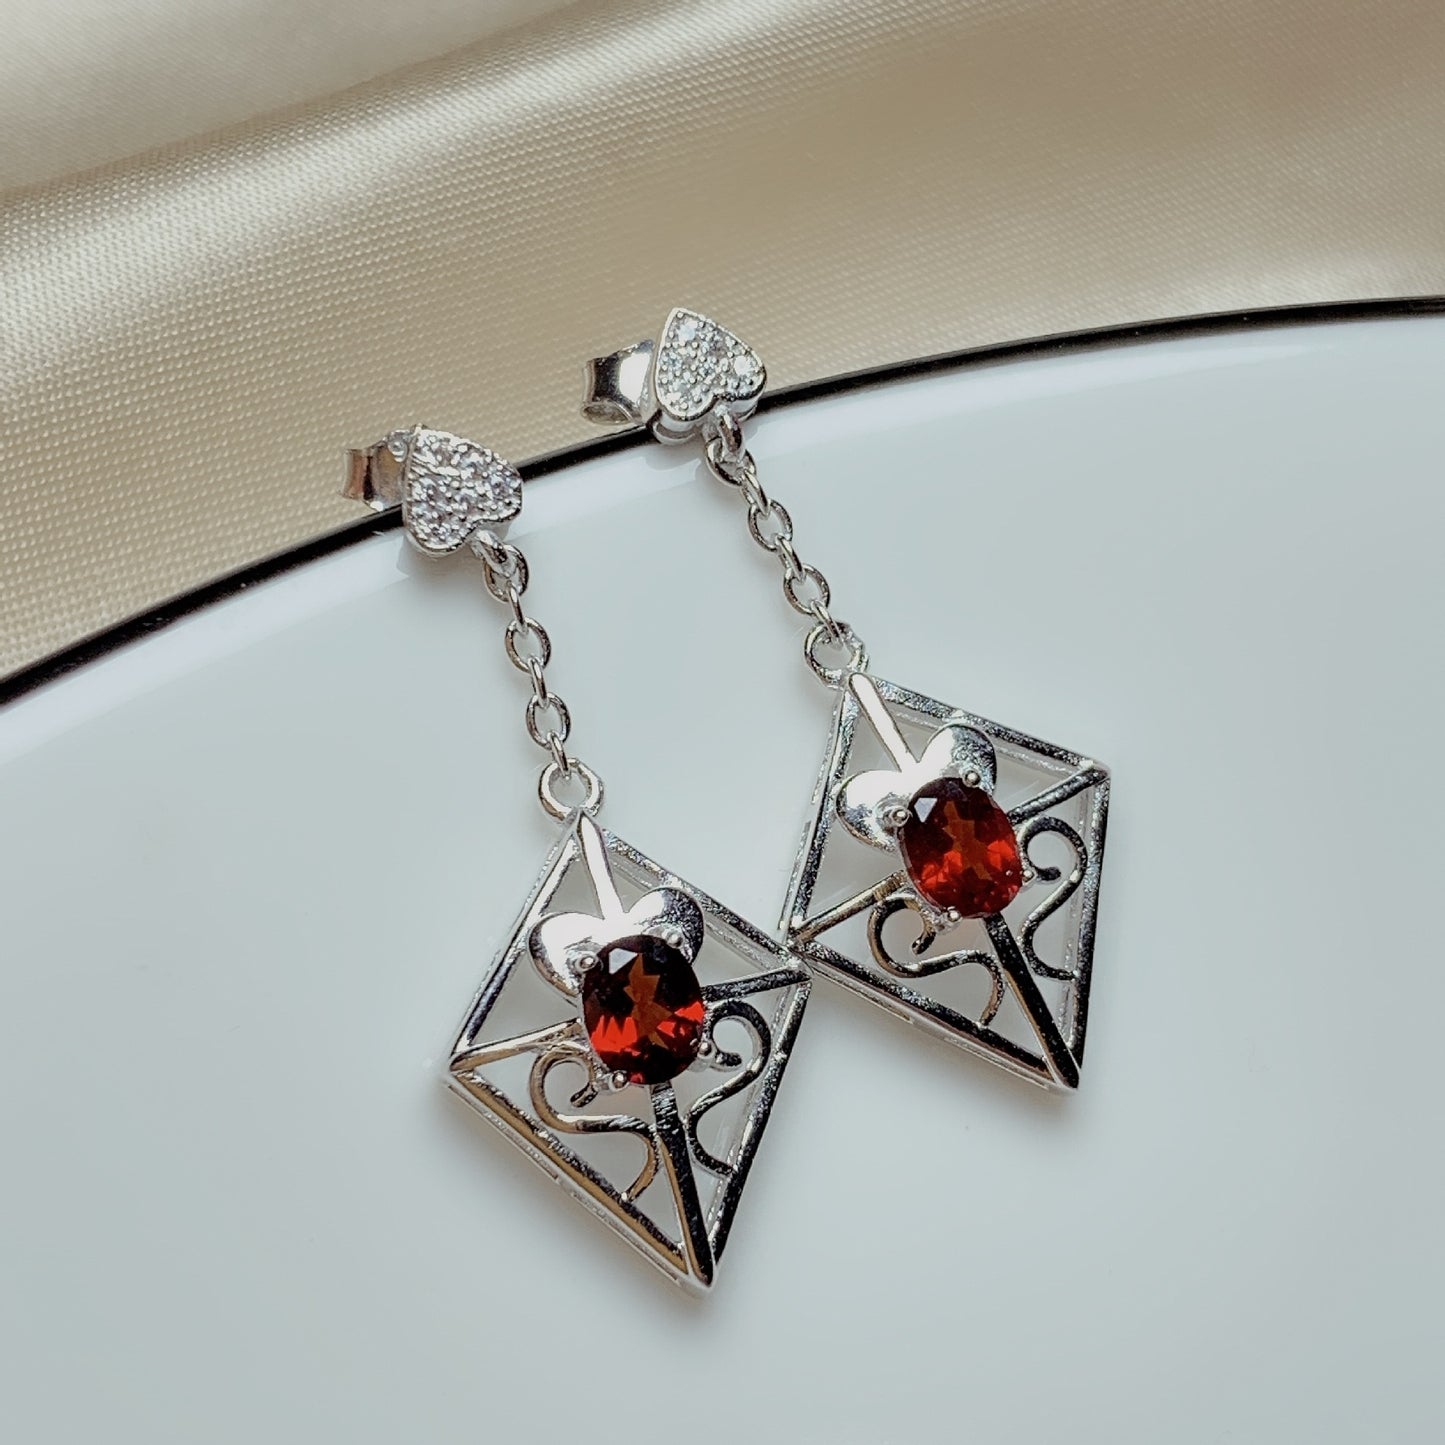 Natural Garnet Stud Earrings with 925 Silver Setting